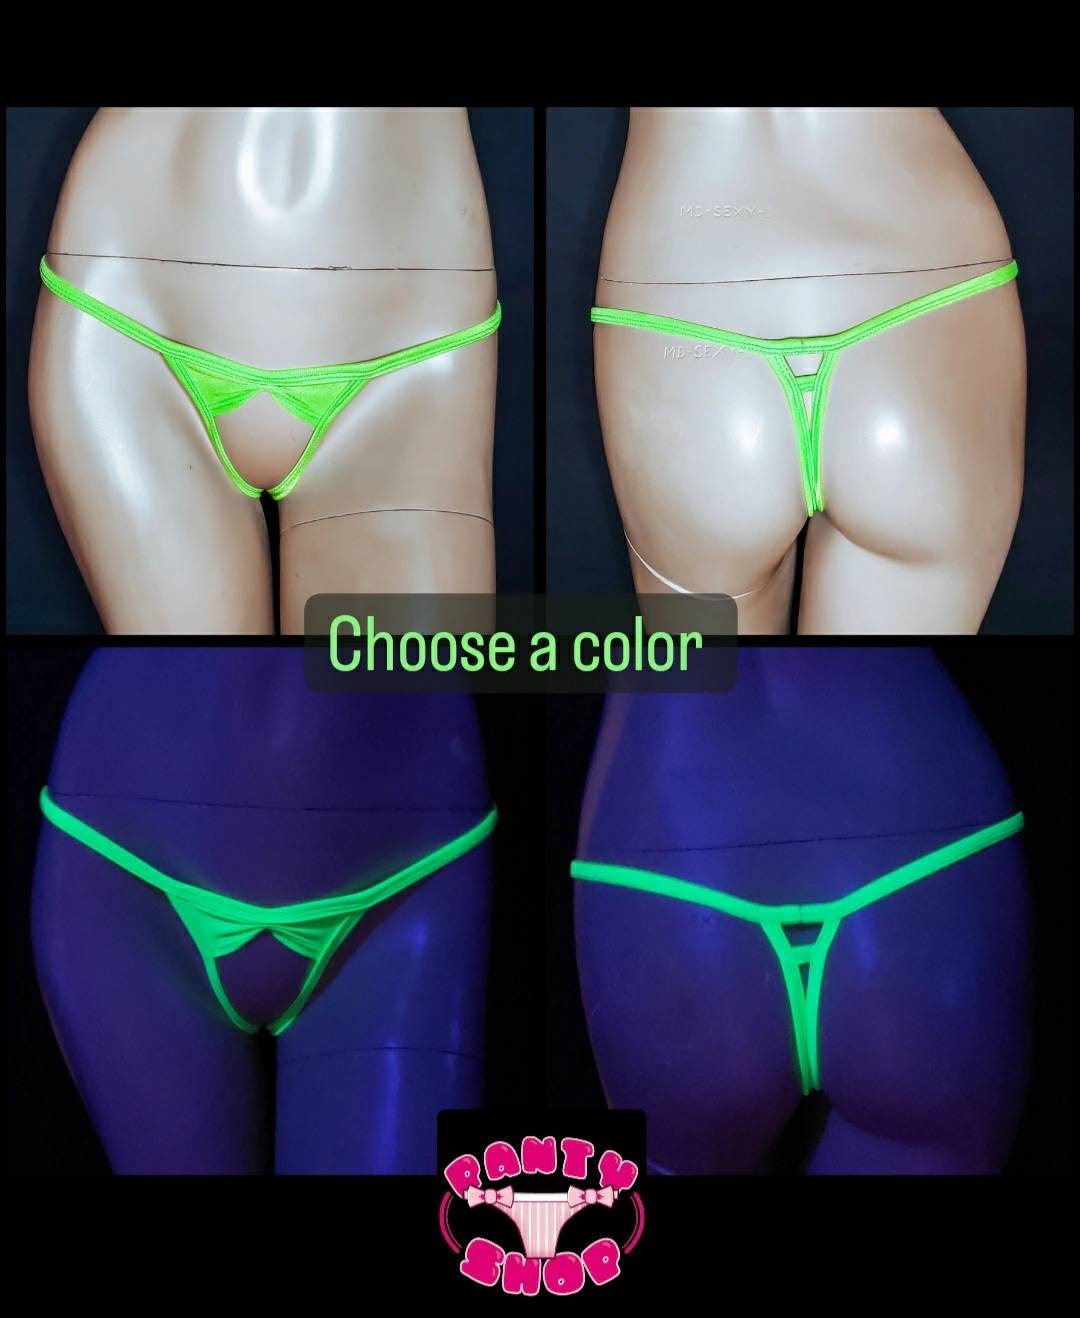 Crotchless Thong Glow UV Blacklight Bikini Open Back Panties Very Sexy  Lingerie Crotch Less G String Panty Awesome Gift Ideas for Her -   Singapore